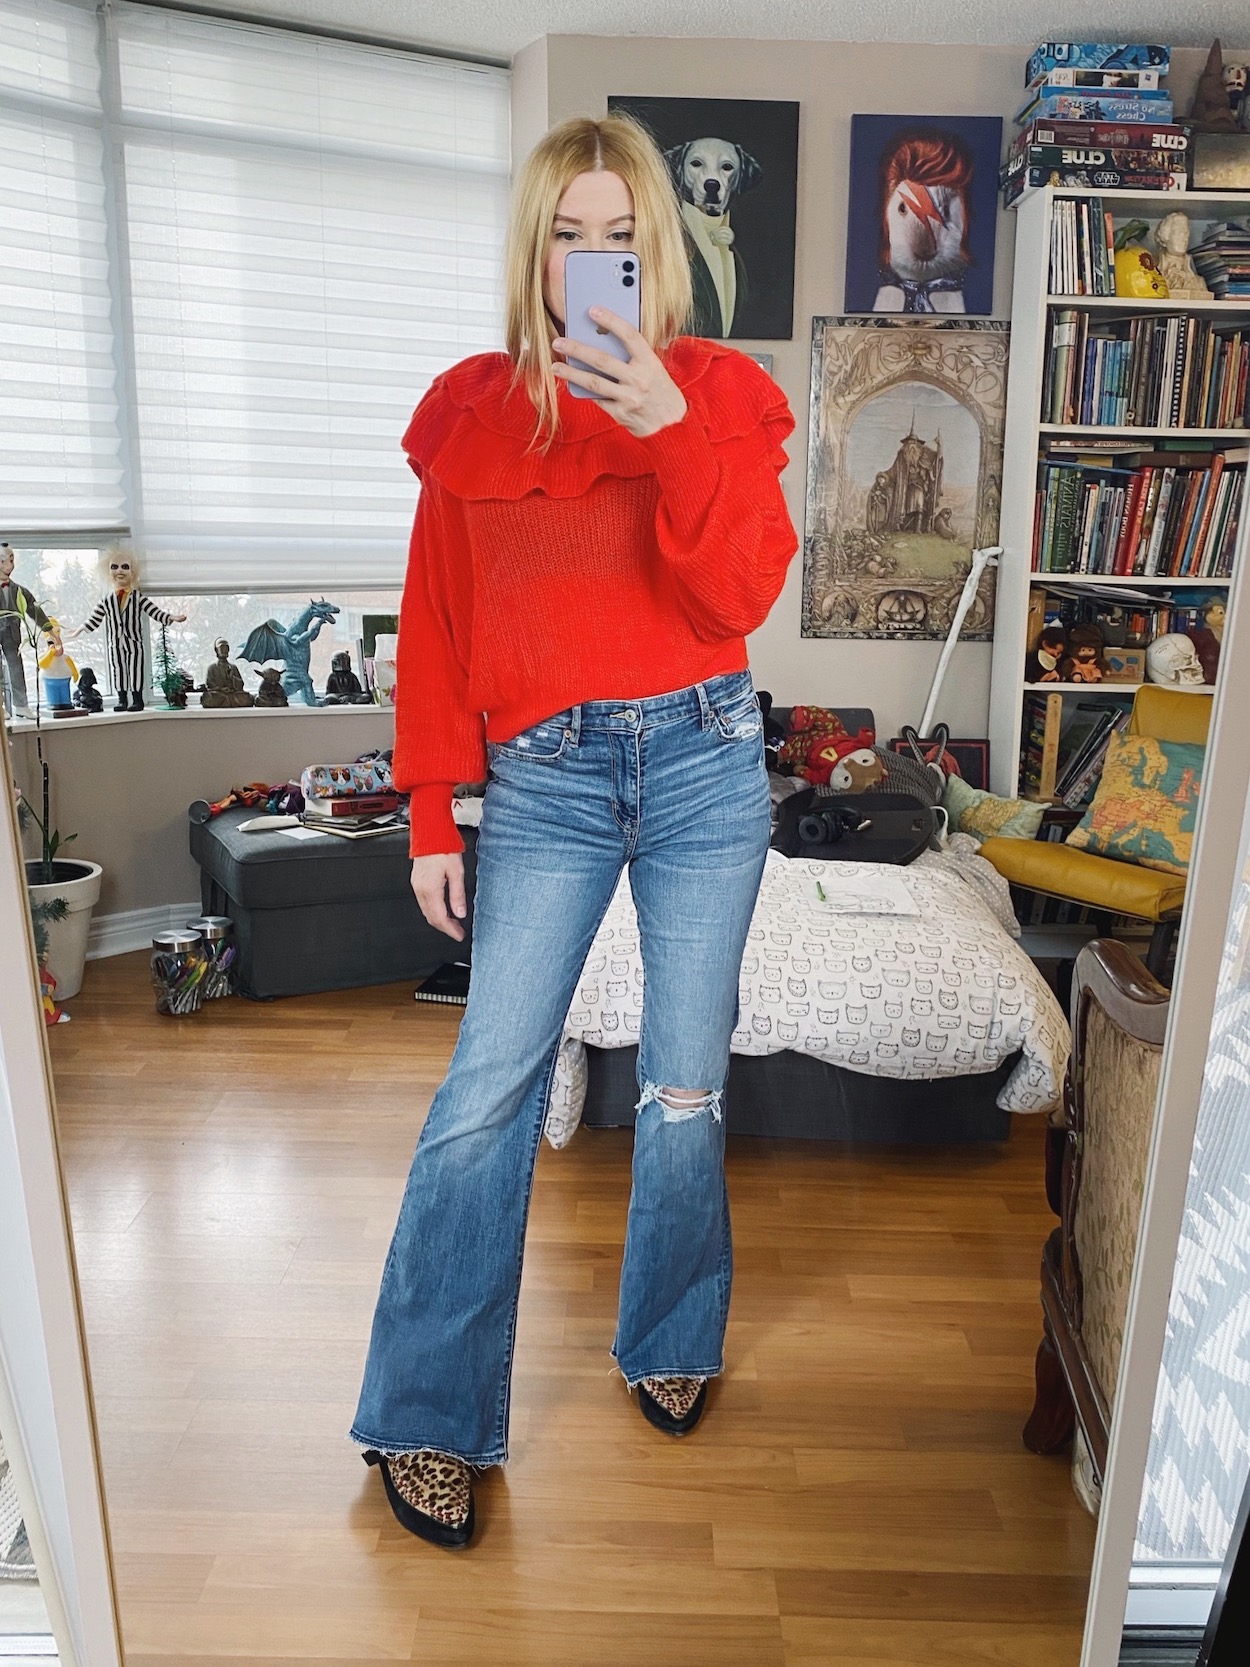 A blonde woman is wearing a bright red sweater, flare jeans, and animal print boots.